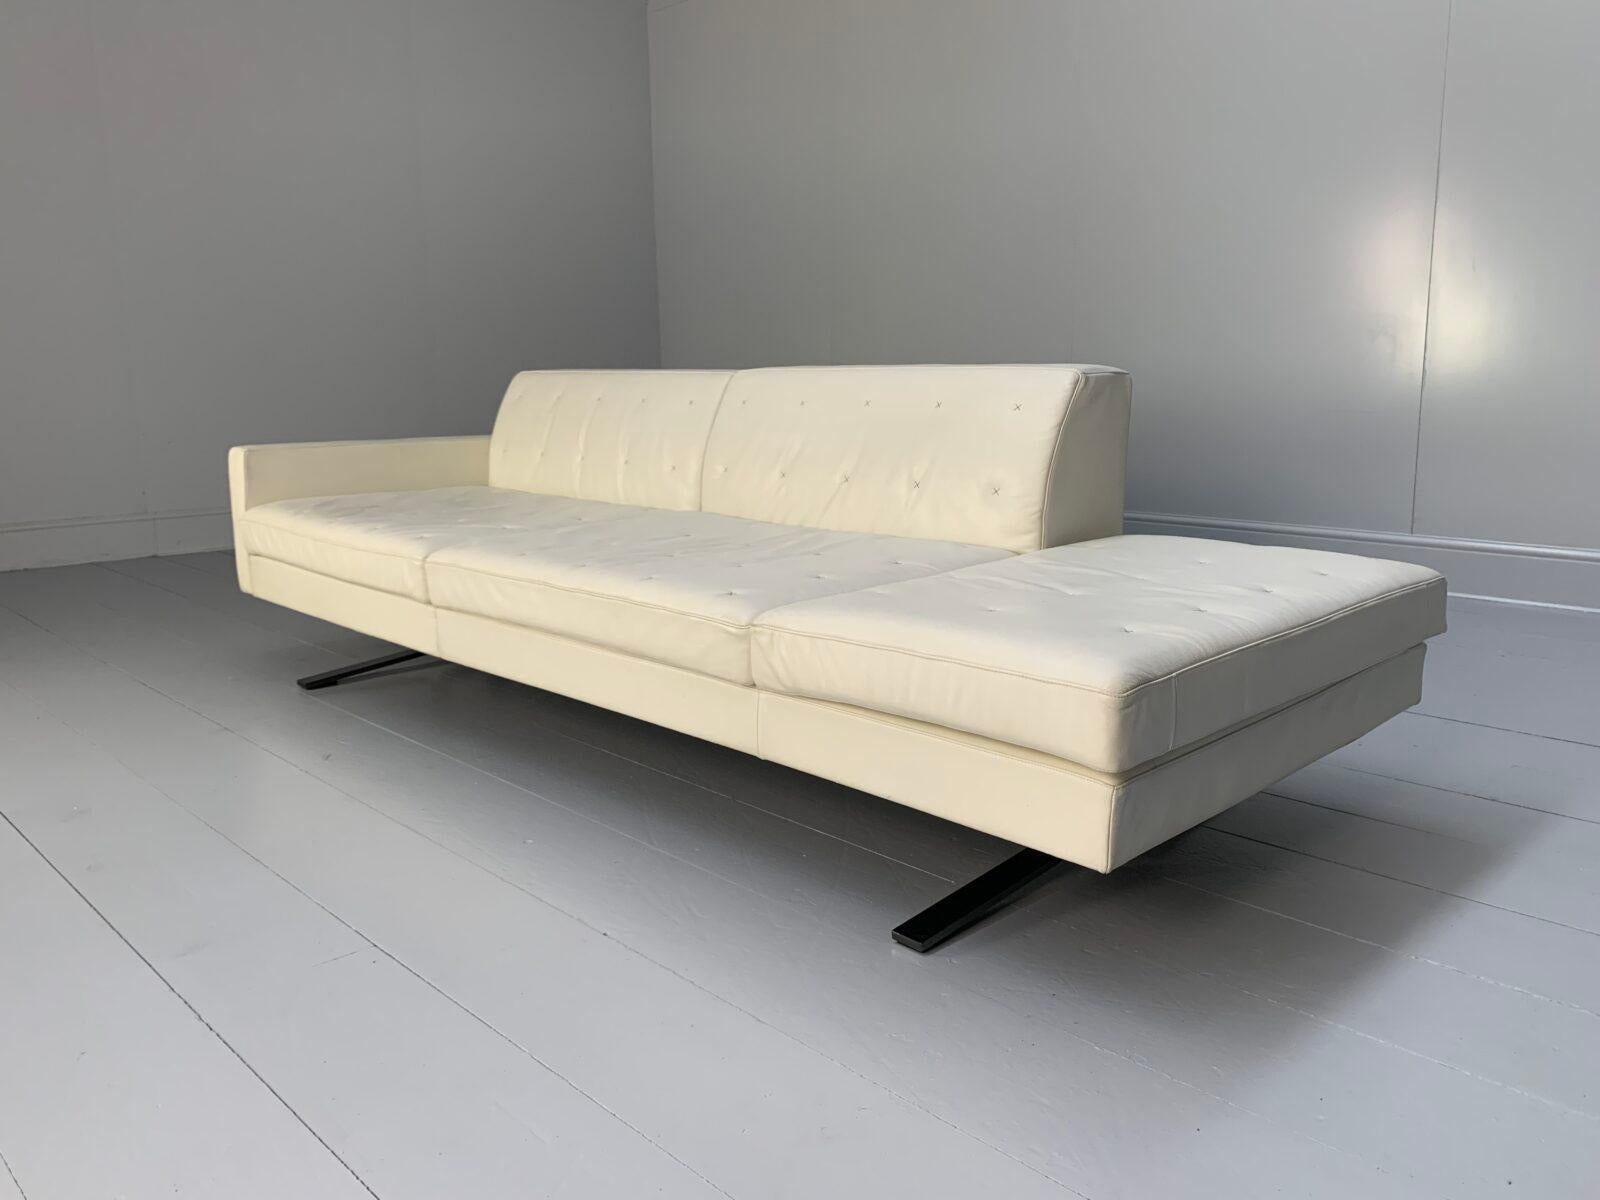 Hello Friends, and welcome to another unmissable offering from Lord Browns Furniture, the UK’s premier resource for fine Sofas and Chairs.
On offer on this occasion is an ultra-rare “Kennedee” 3-seat, chaise-end sofa from the world renown Italian